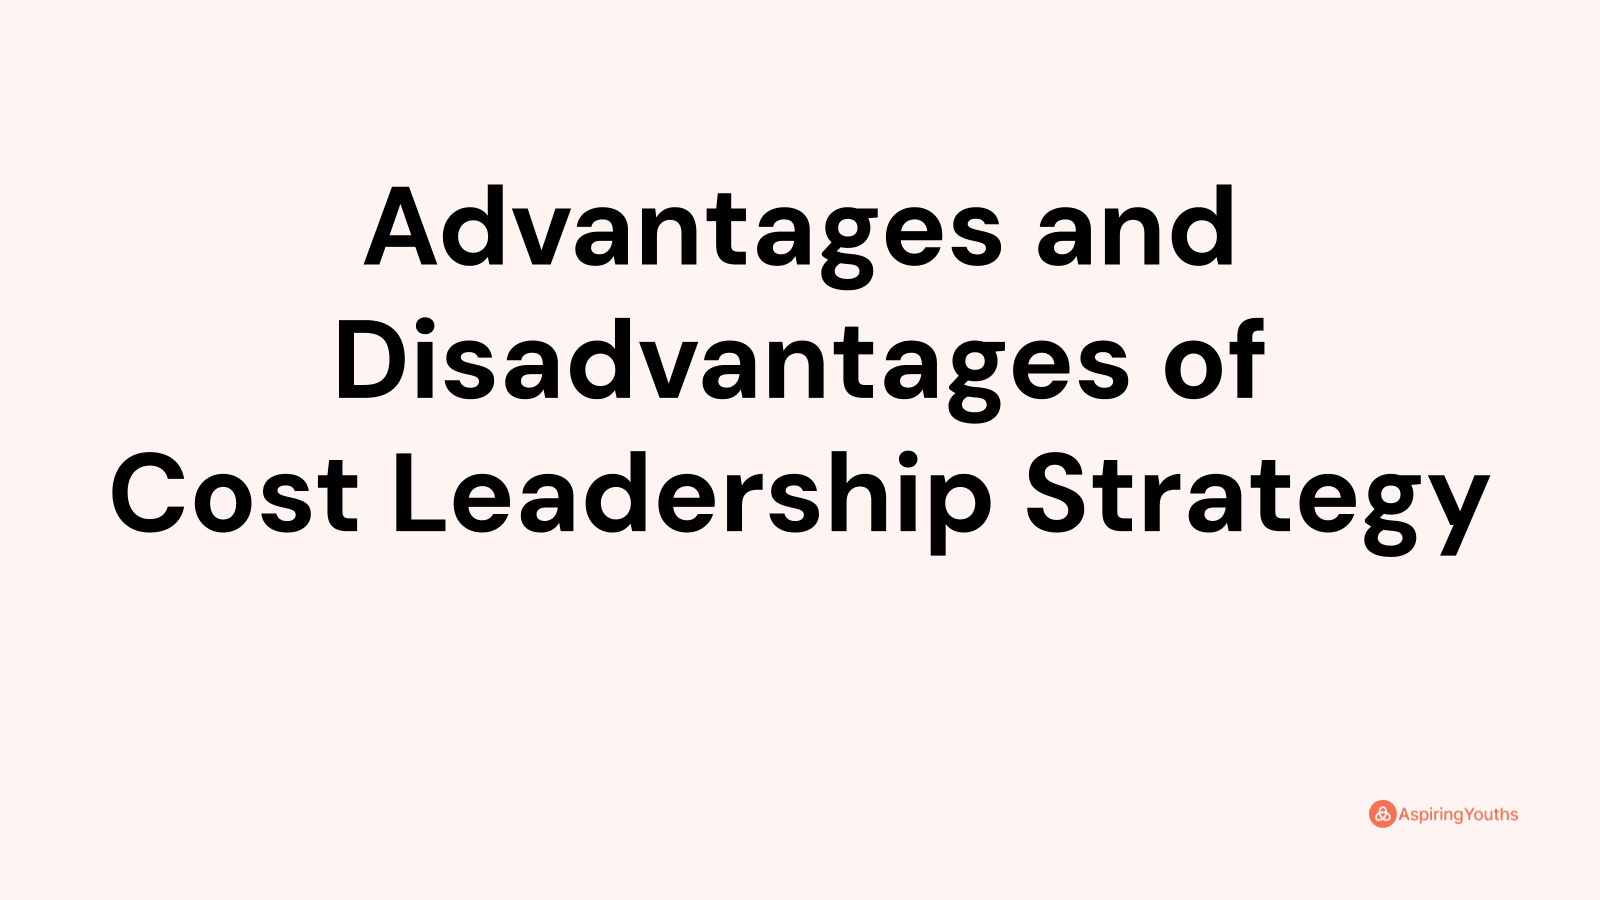 Advantages and disadvantages of Cost Leadership Strategy